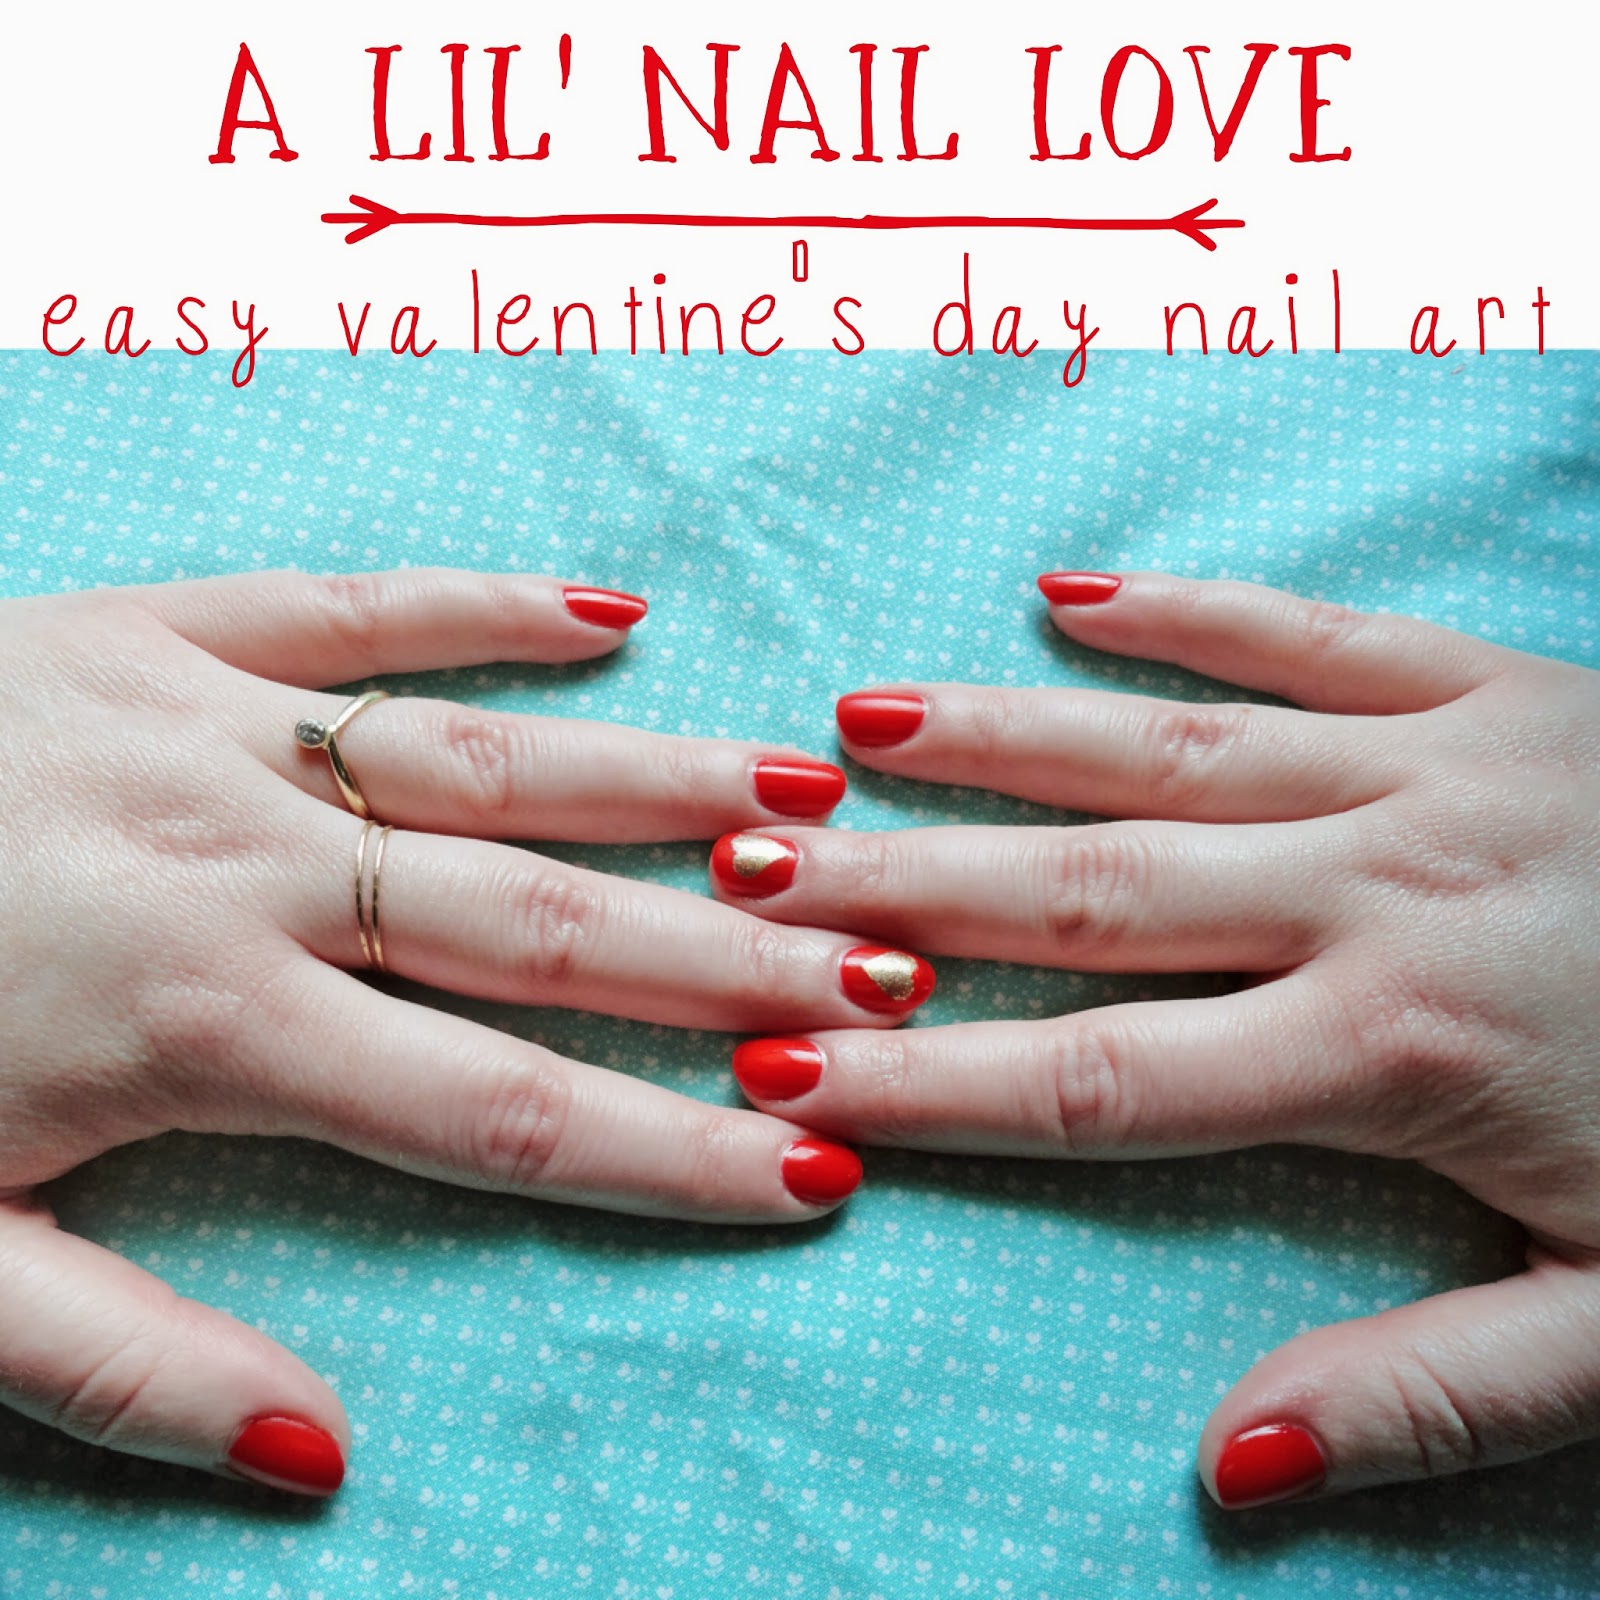 routinebeauty easy valentine's day nail art